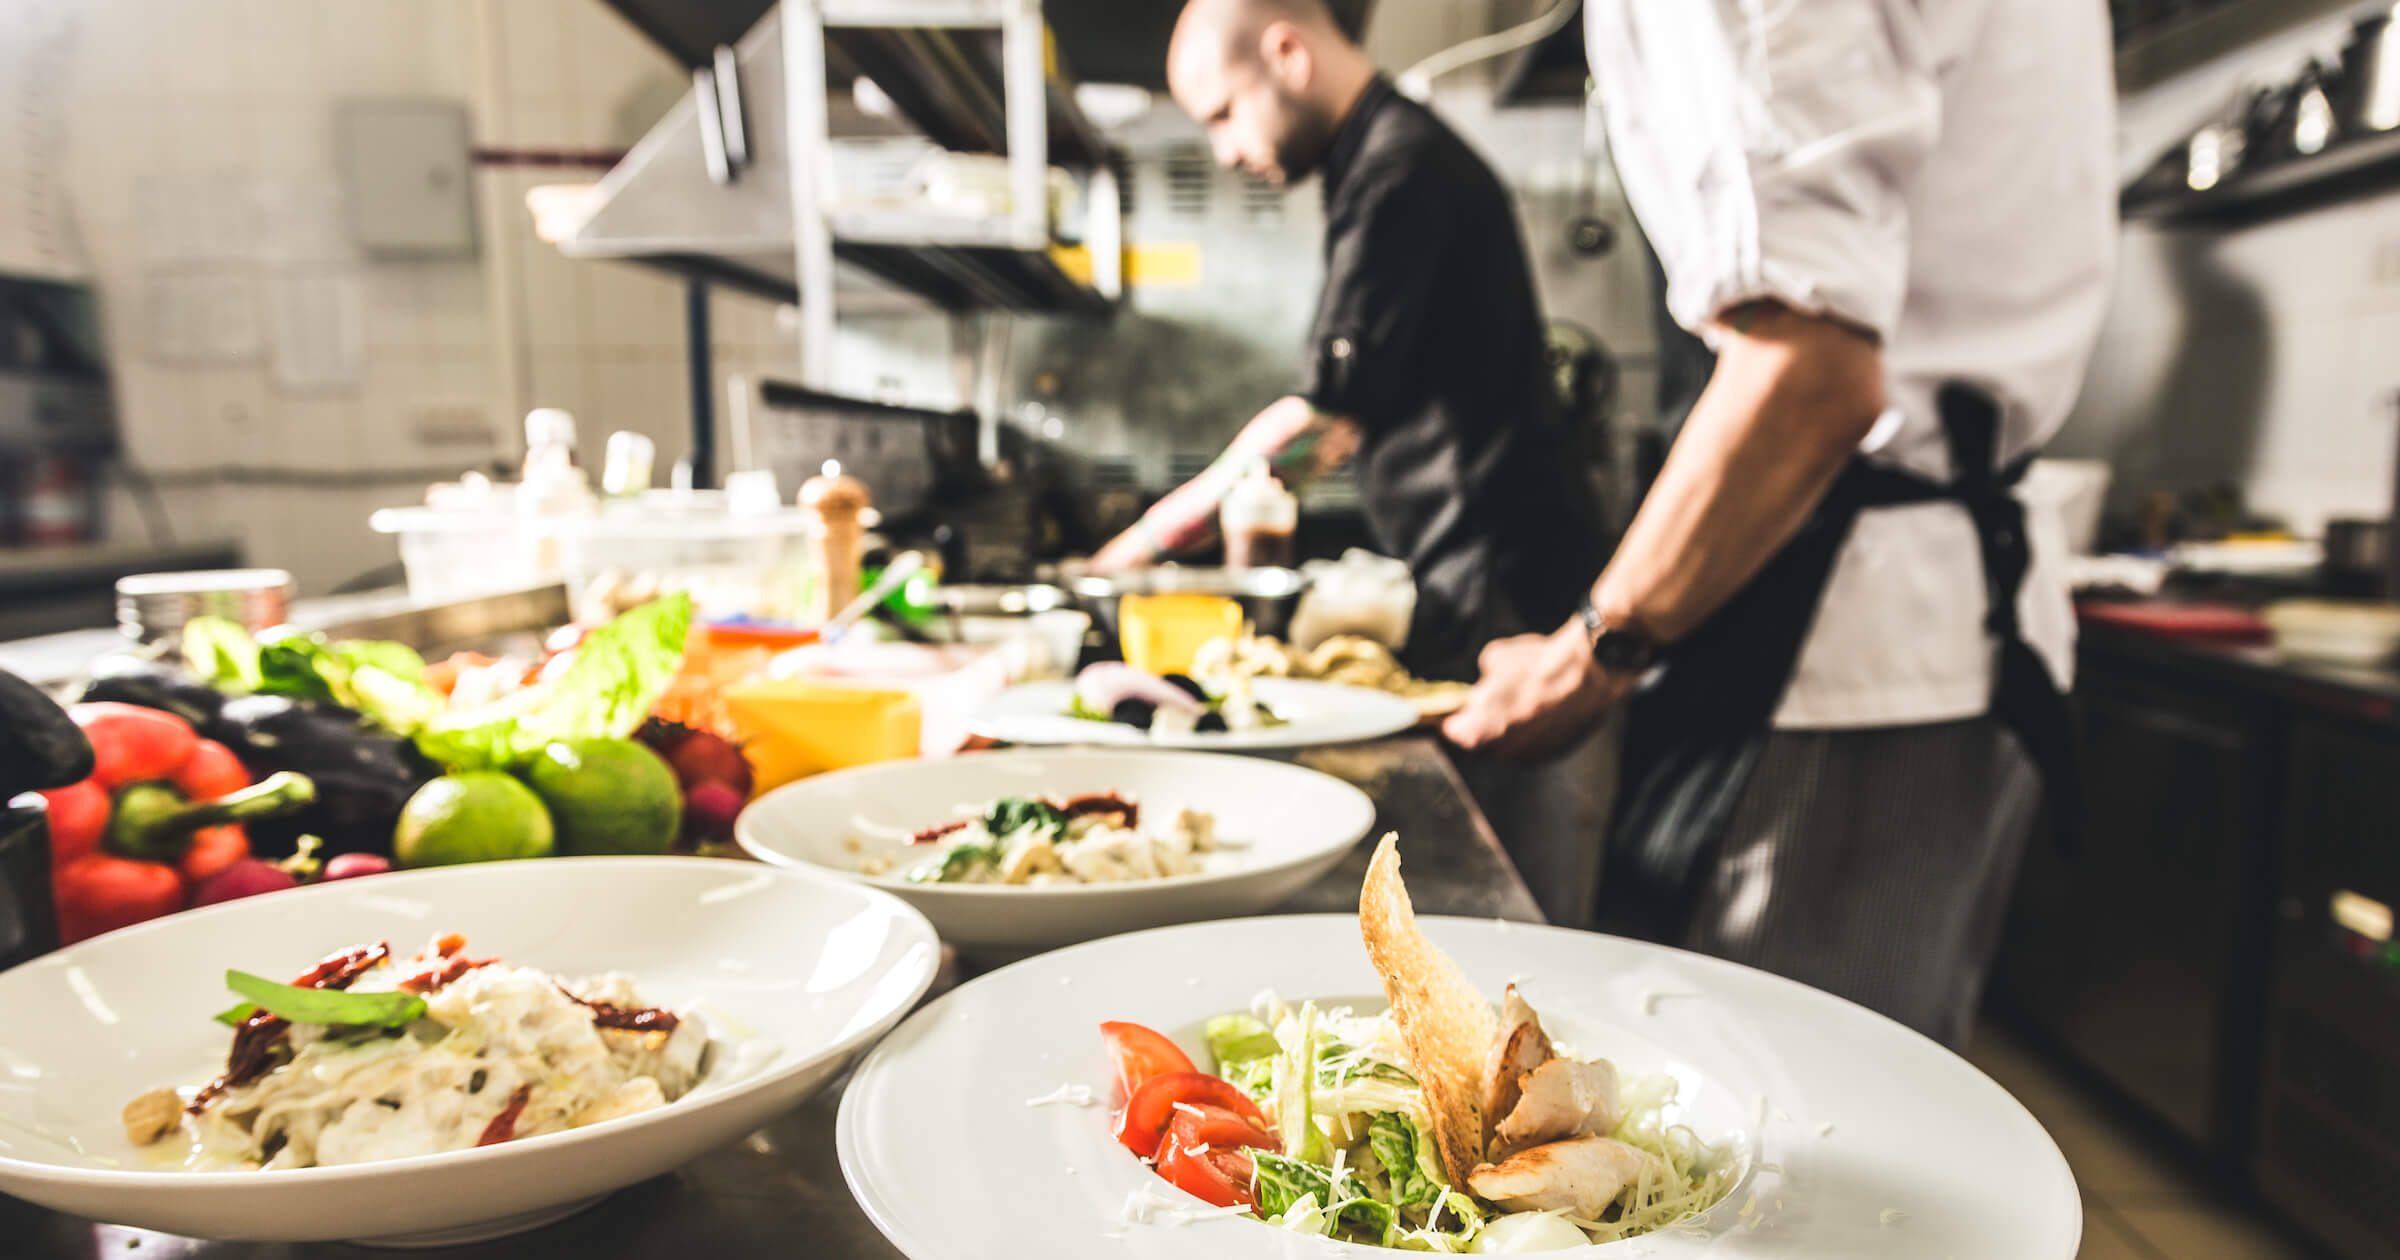 9 Cutting-Edge Food Service Industry Trends